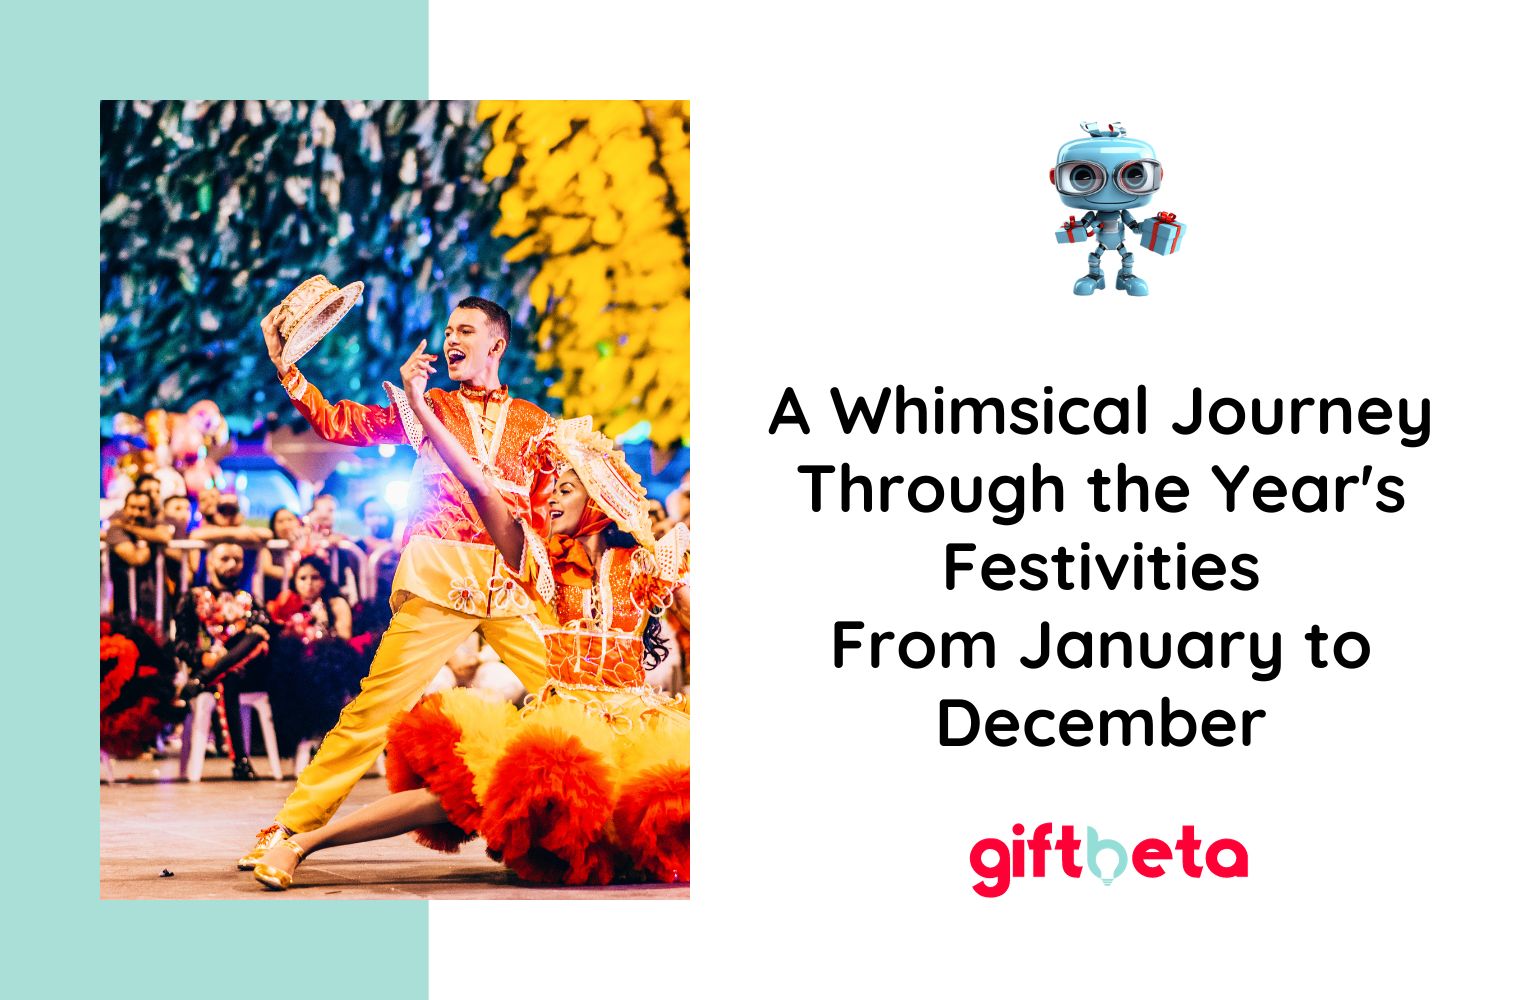 A Whimsical Journey Through Festivities - January to December